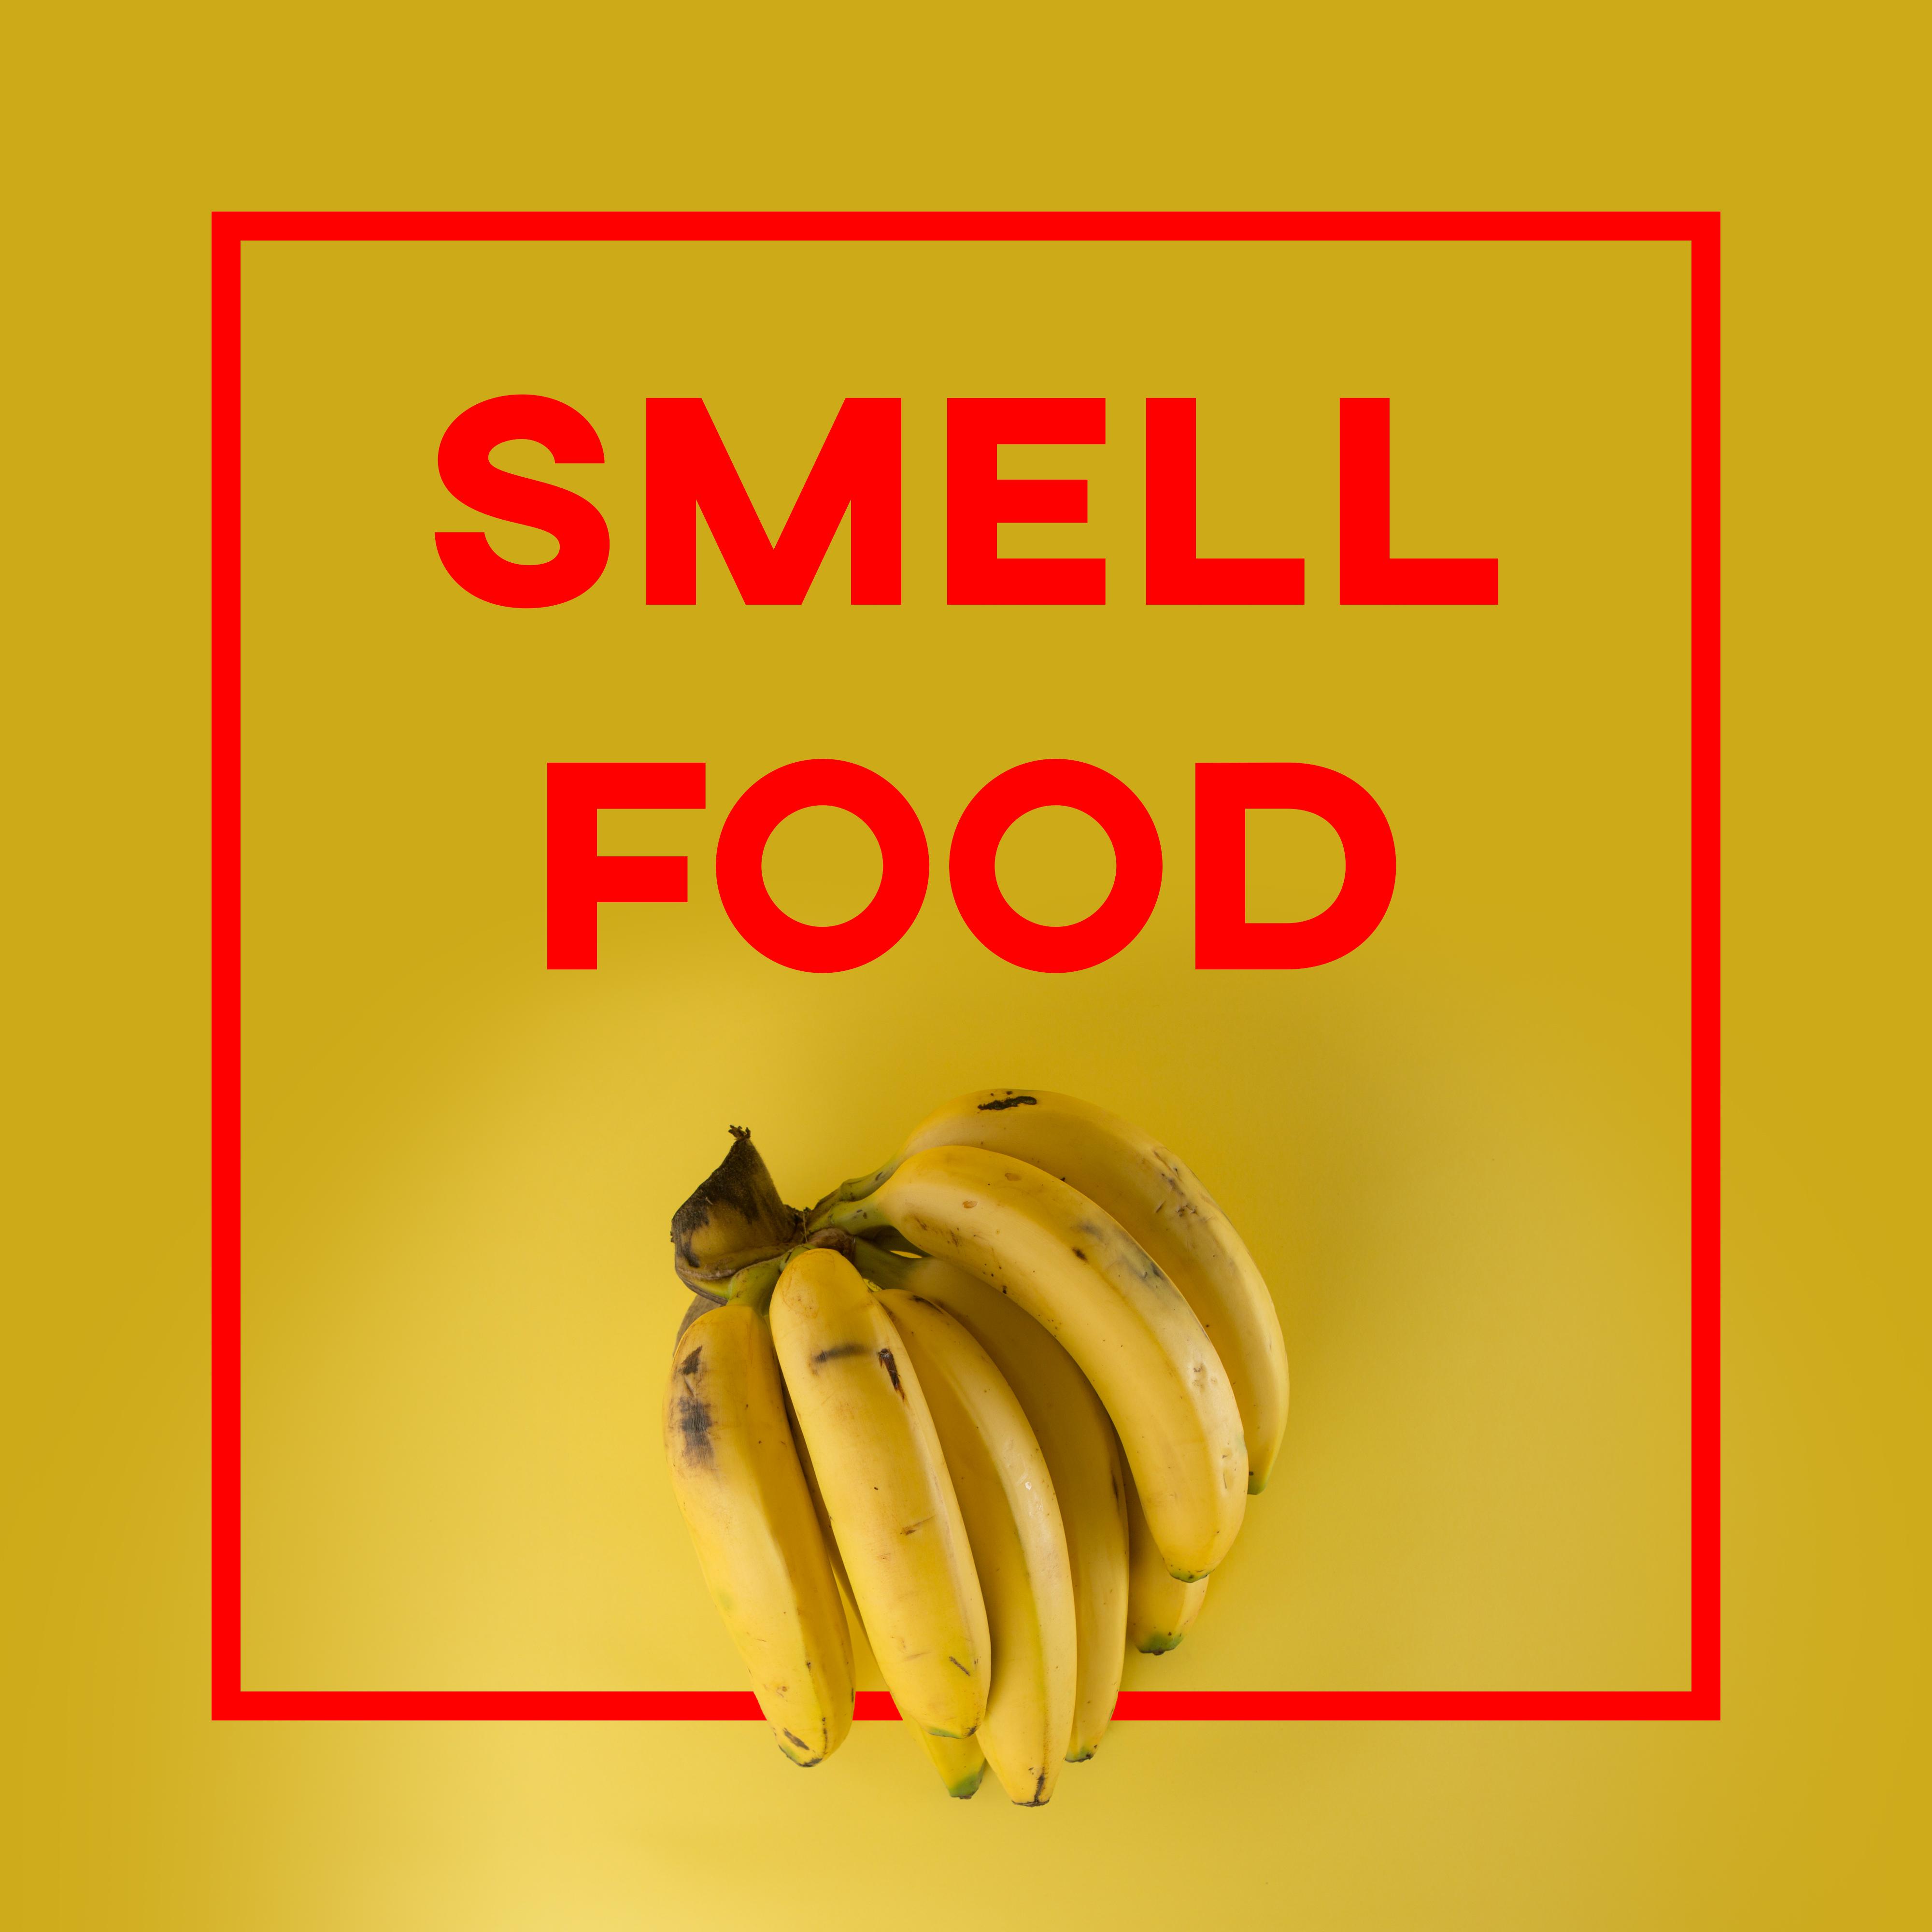 Smell Food – Cooking, Drink, Date, Flame, Wine, Cake, Flowers, Colorful